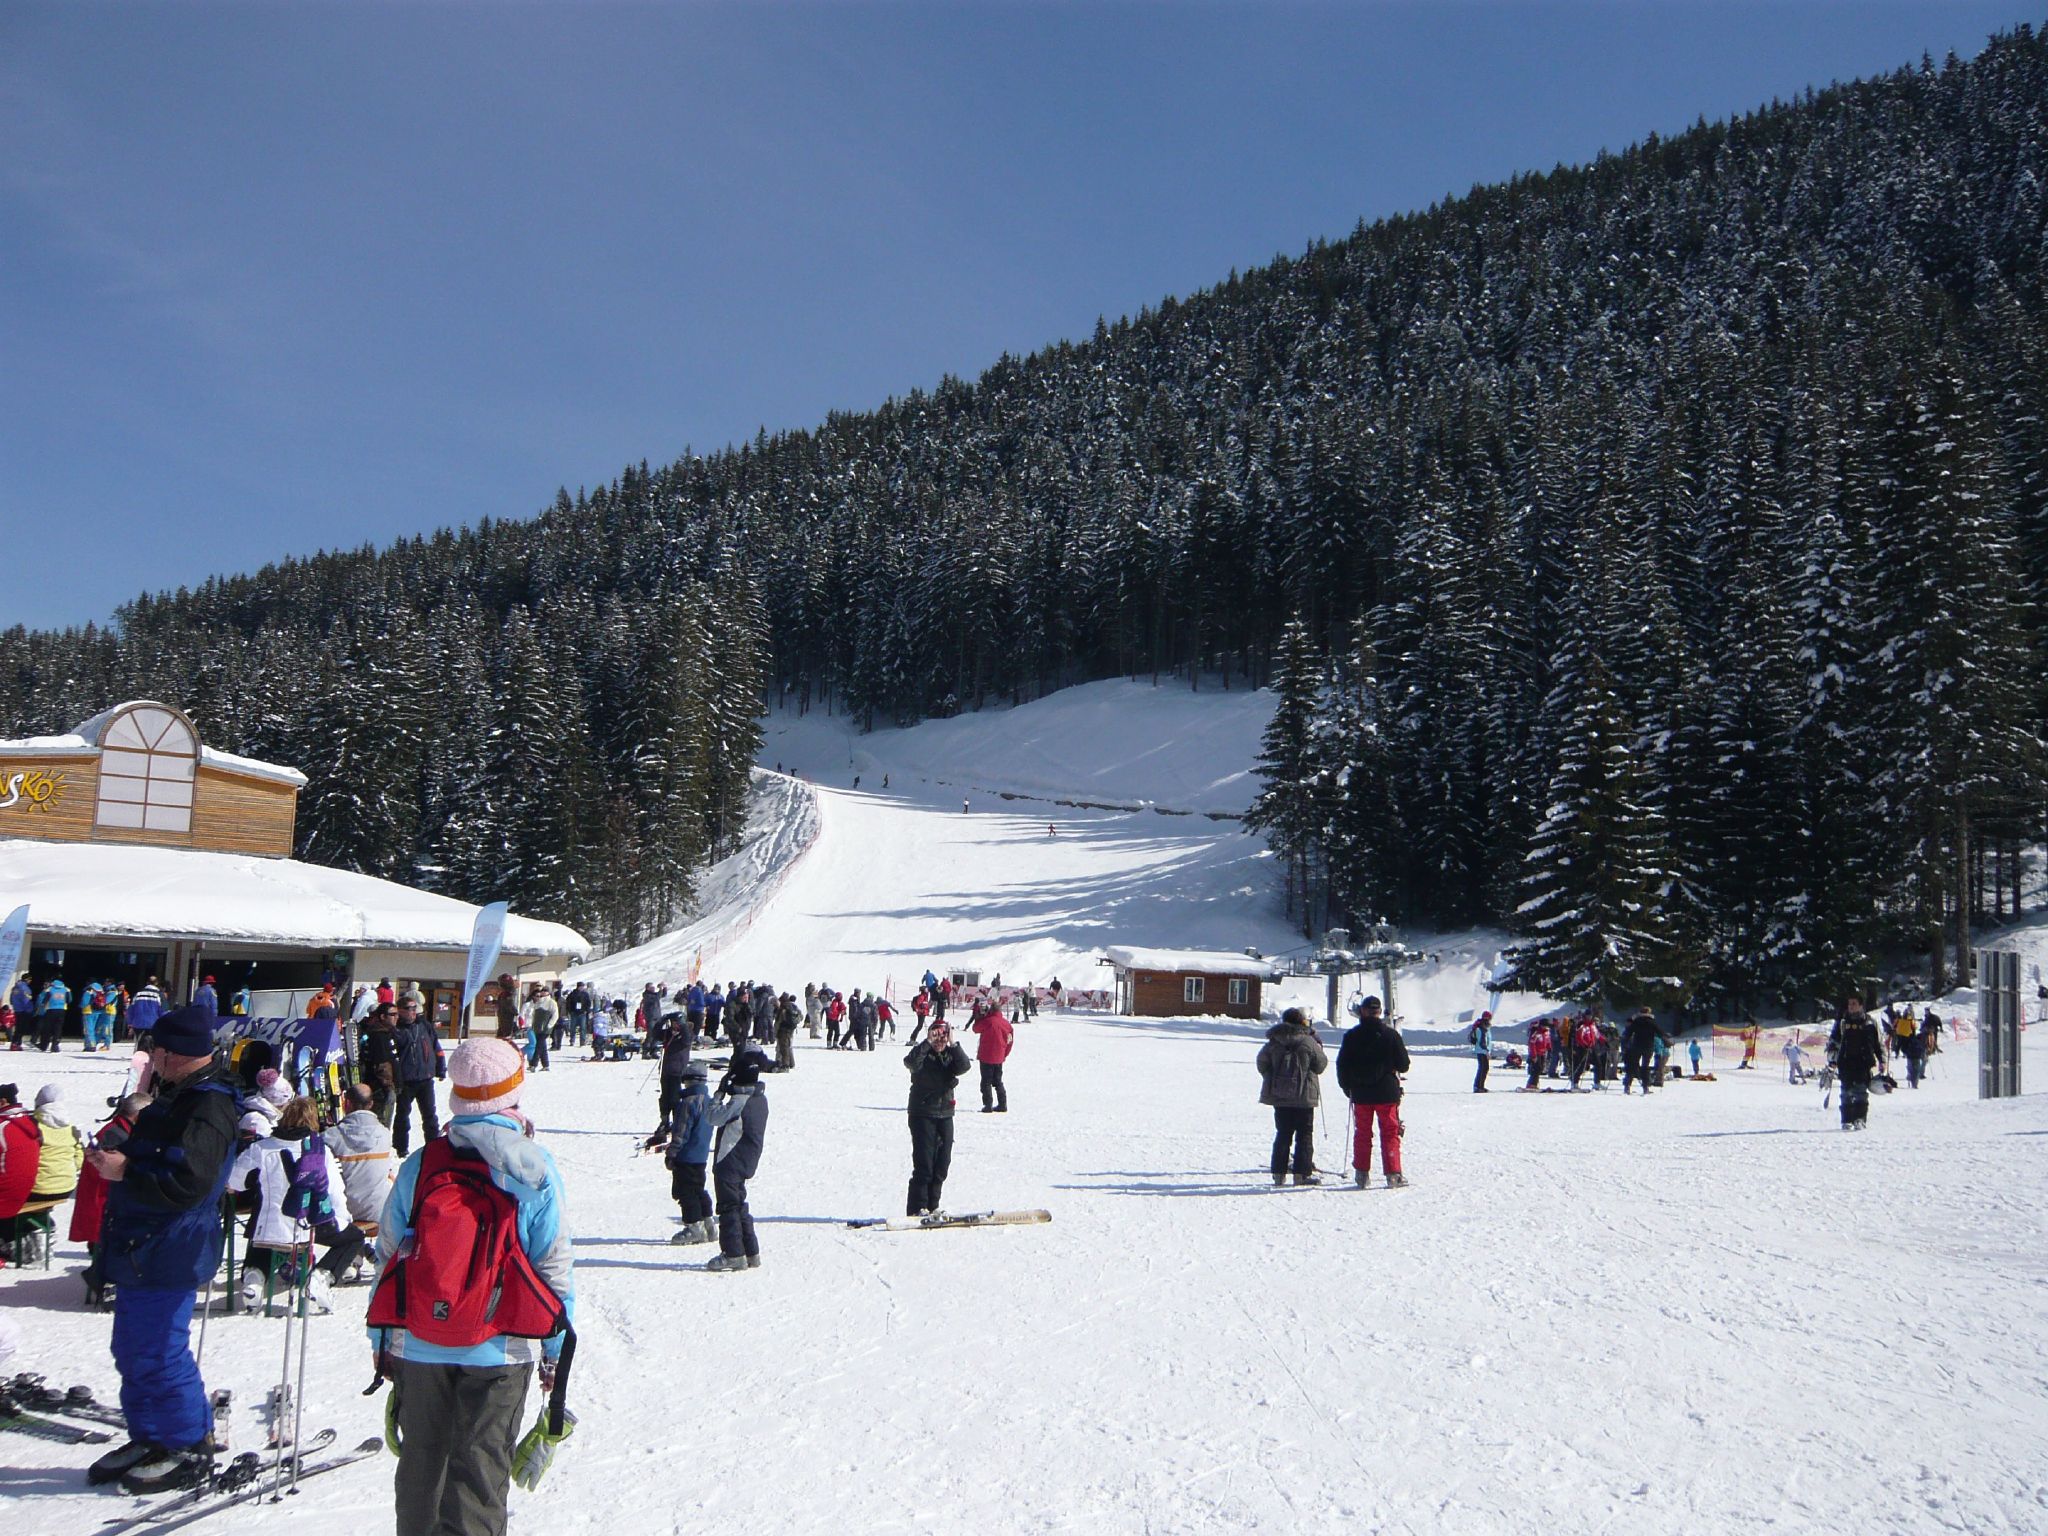 a large group of people in a ski area